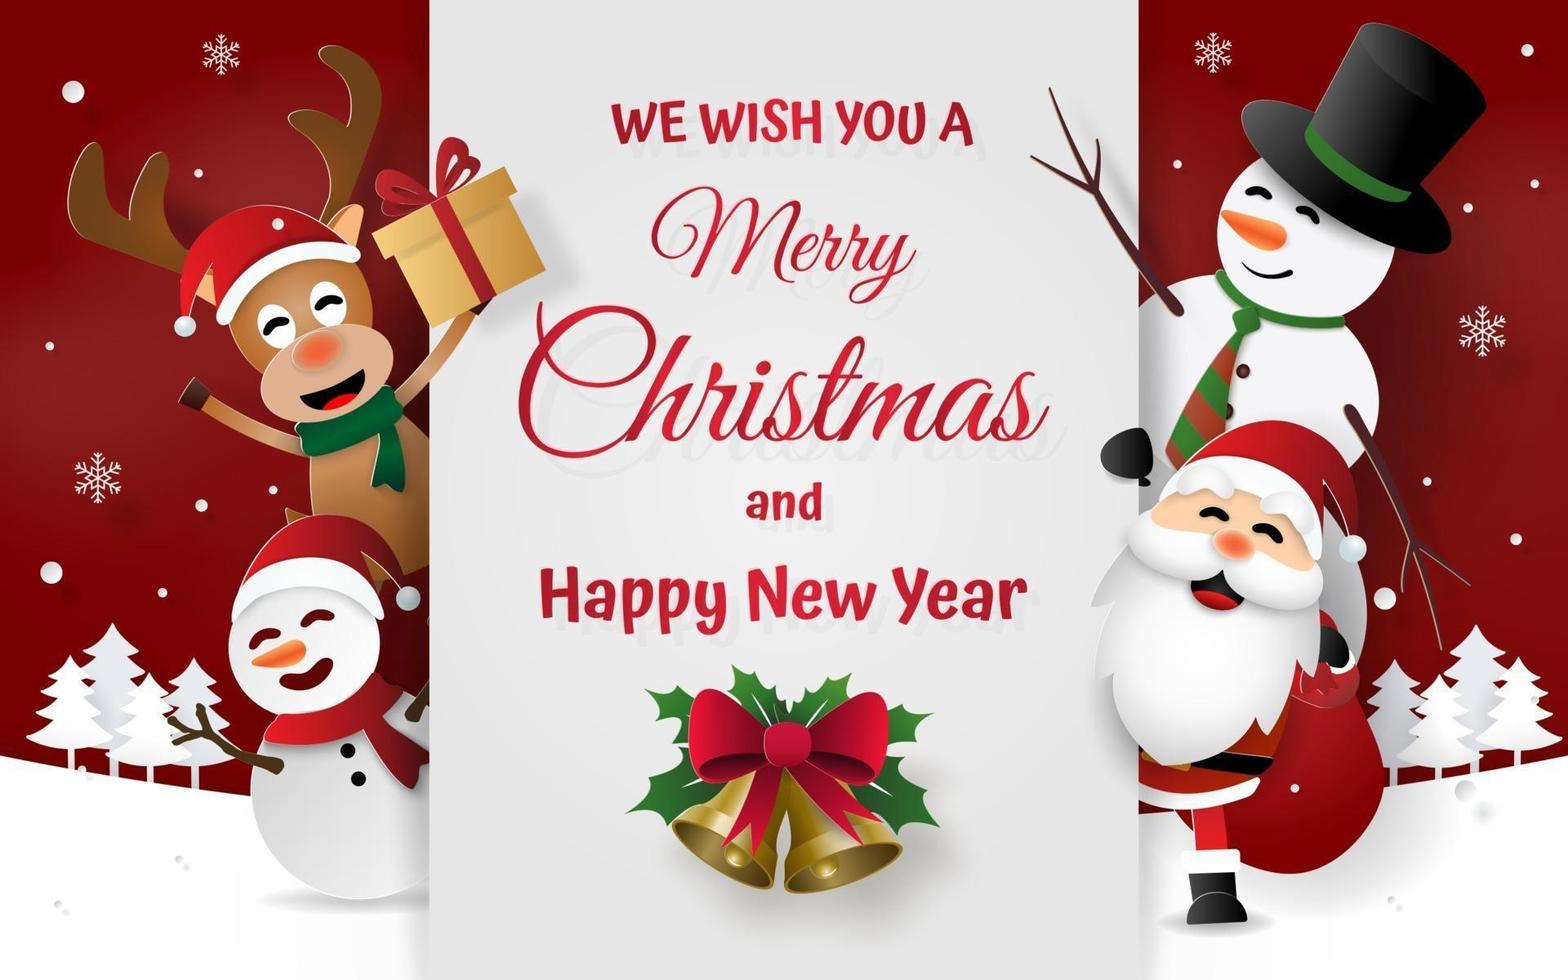 Christmas party with Santa Claus and friends, Merry Christmas vector